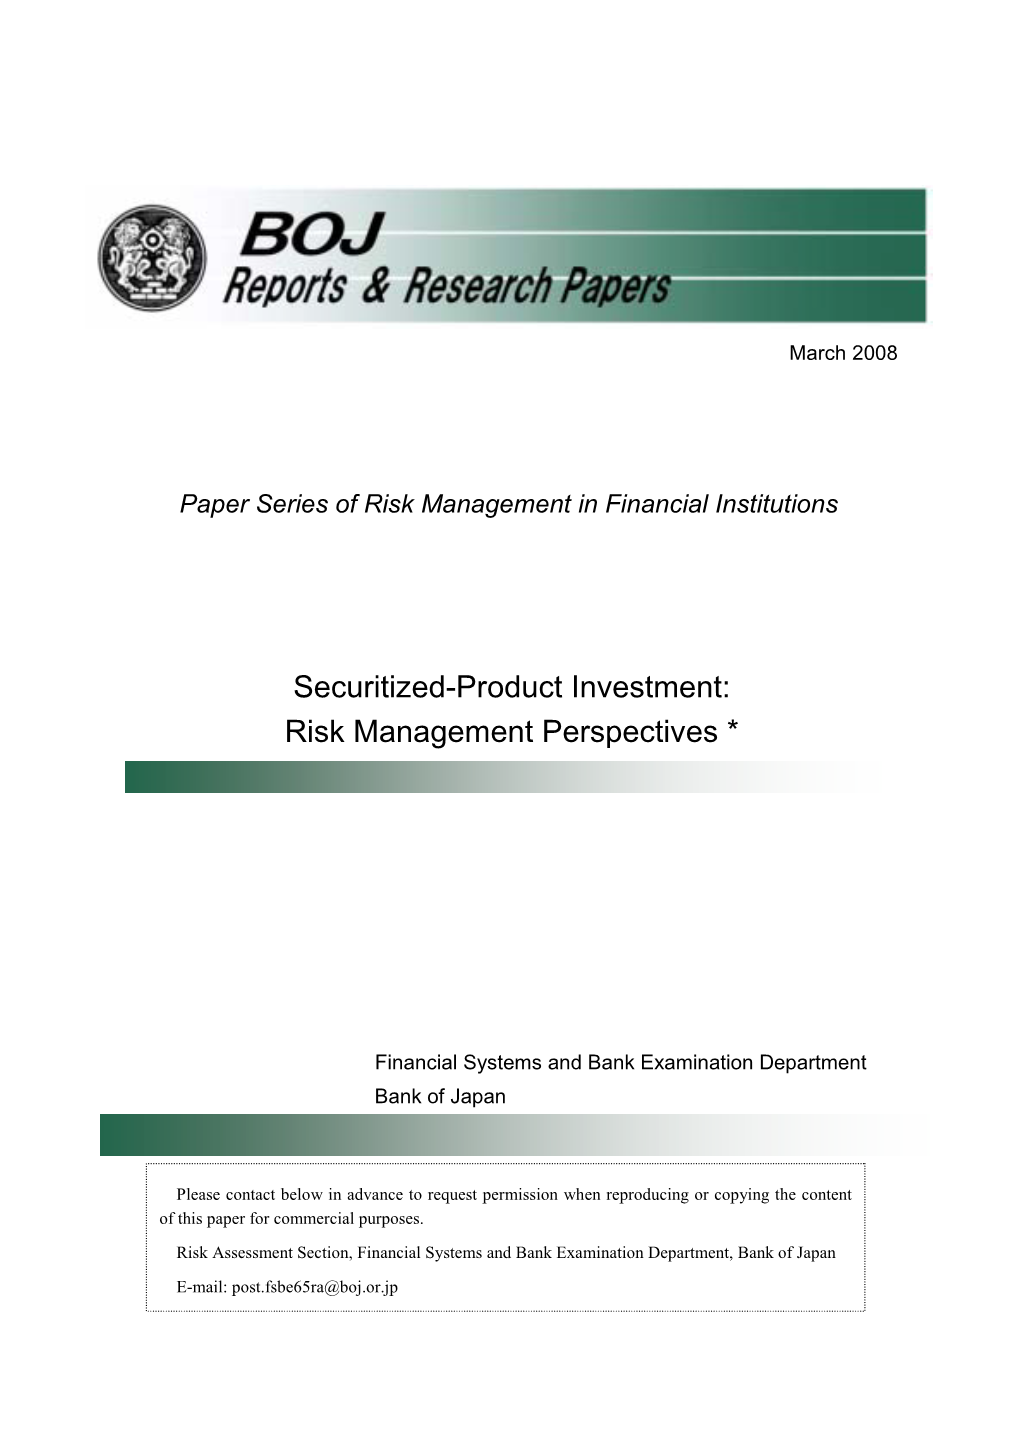 Securitized-Product Investment: Risk Management Perspectives